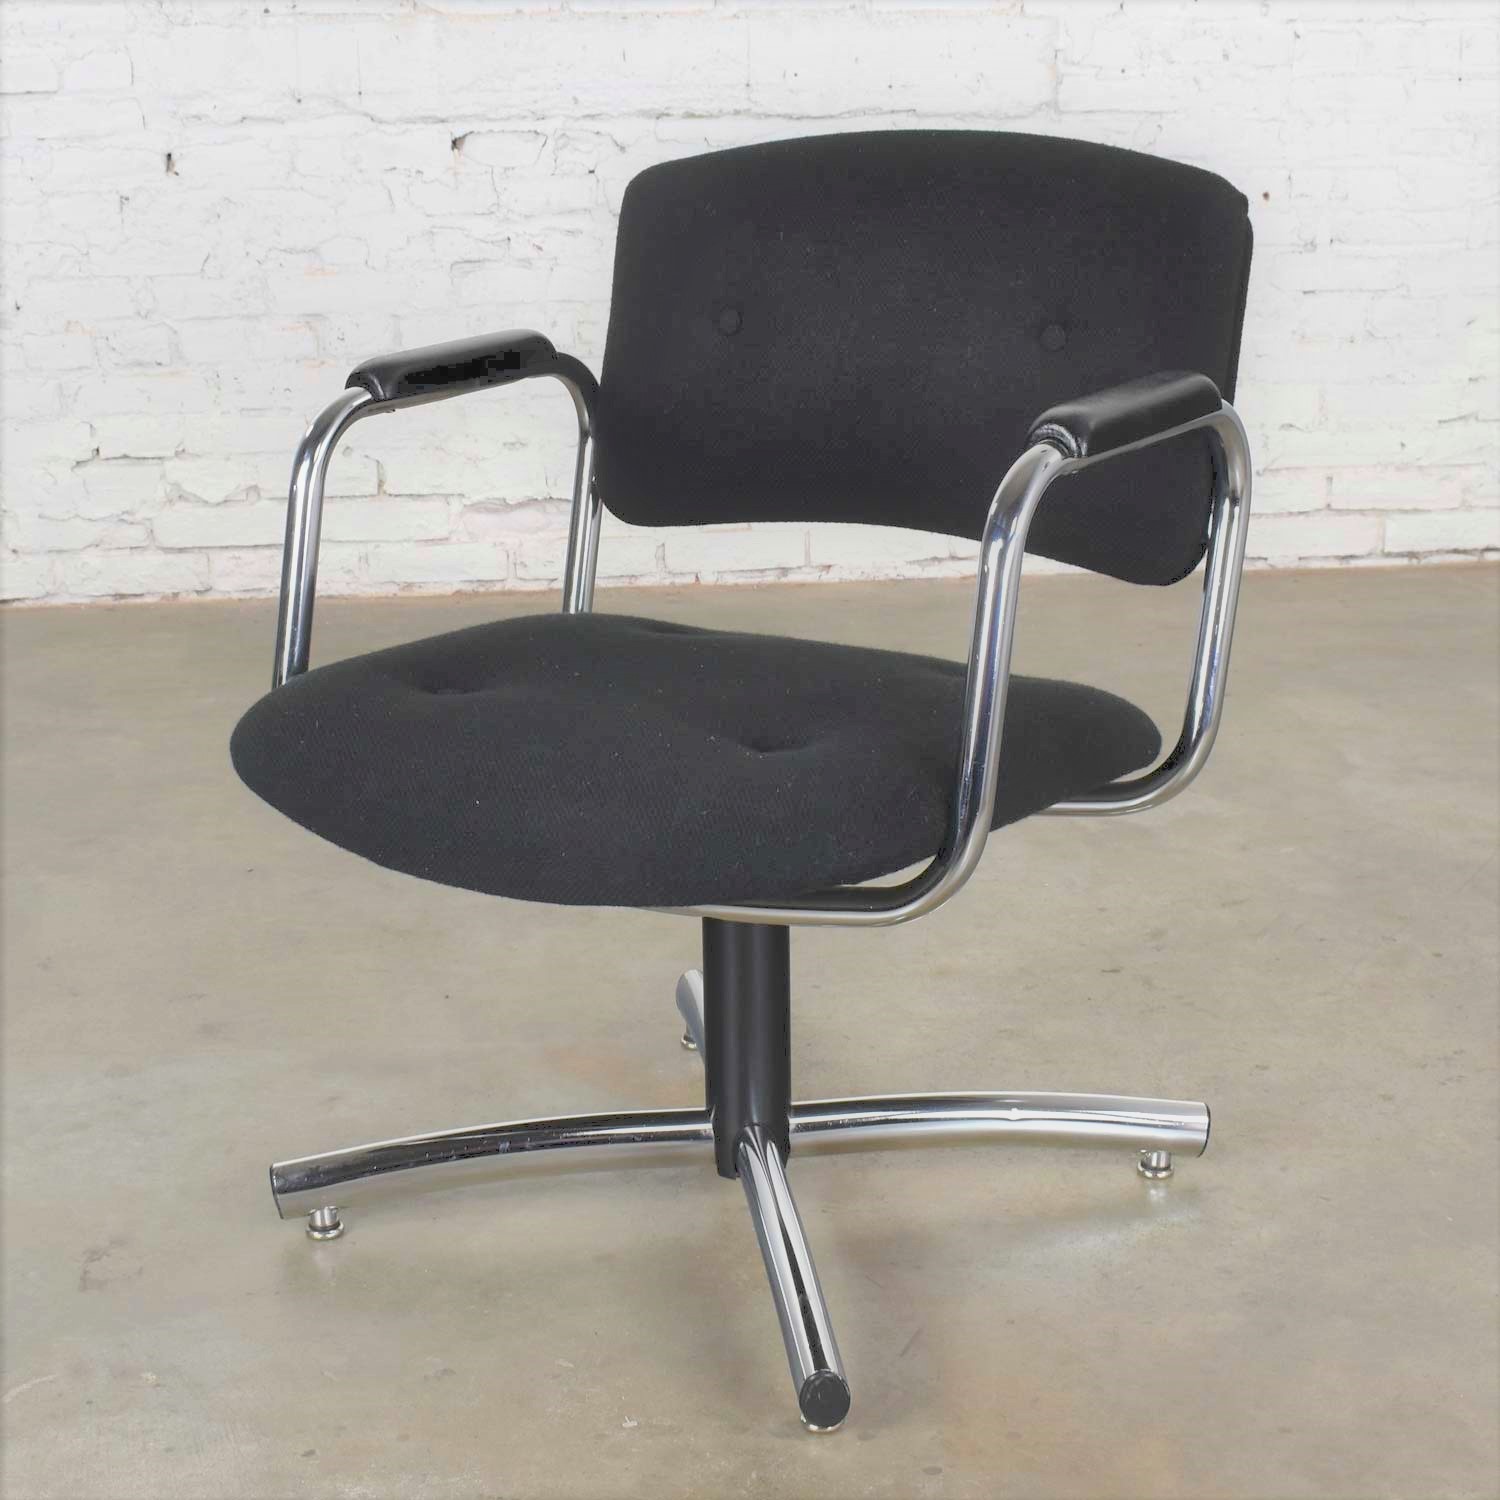 Vintage Modern Chrome & Black Office Armchair 4 Prong Base Style Steelcase 1970